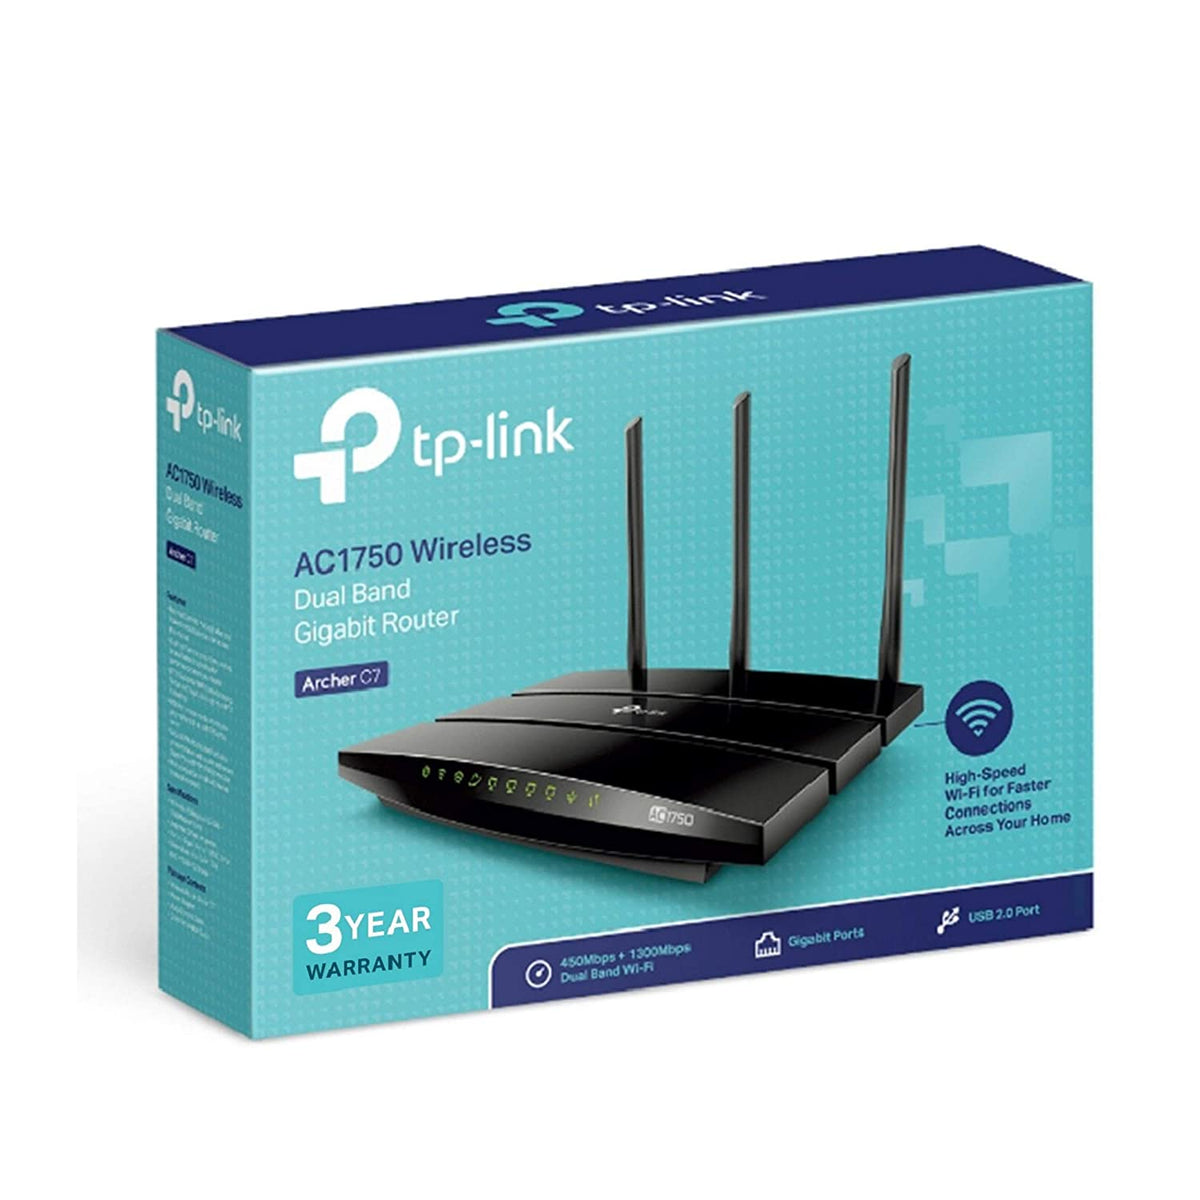 TP-Link Archer C7 AC1750 Dual Band Gigabit Wireless Cable Router, Wi-Fi Speed Up to 1300 Mbps/5 GHz + 450 Mbps/2.4 GHz, 4 Gigabit LAN Ports, 1 USB Port, Qualcomm Chipset